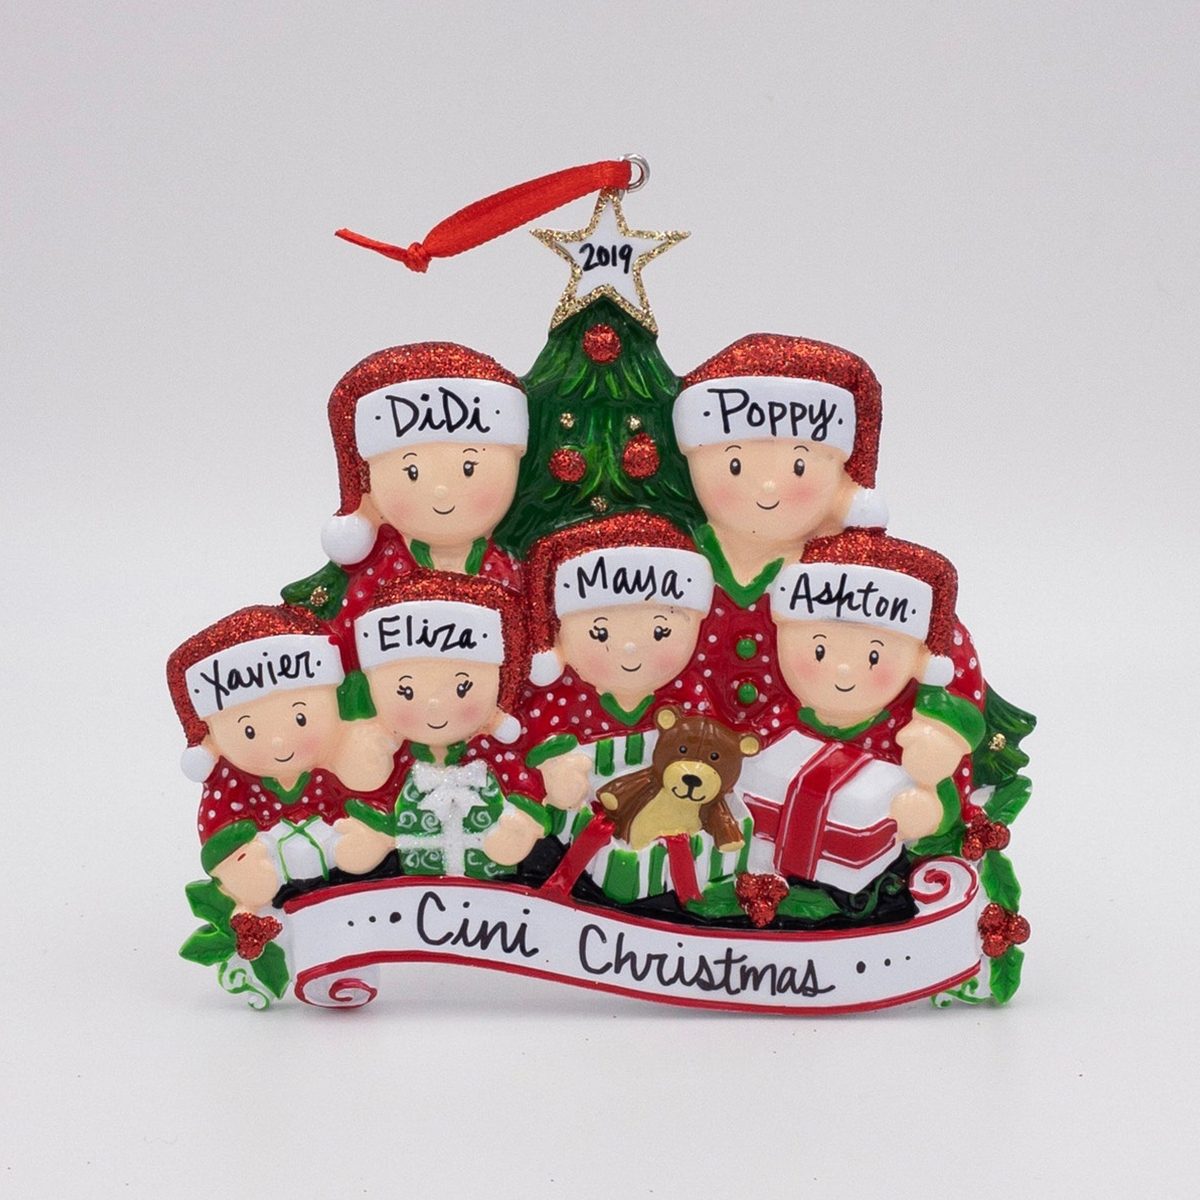 https://www.rd.com/wp-content/uploads/2017/12/Personalized-Family-Christmas-Ornament-via-adornamentsny-etsy.jpg?fit=700%2C700